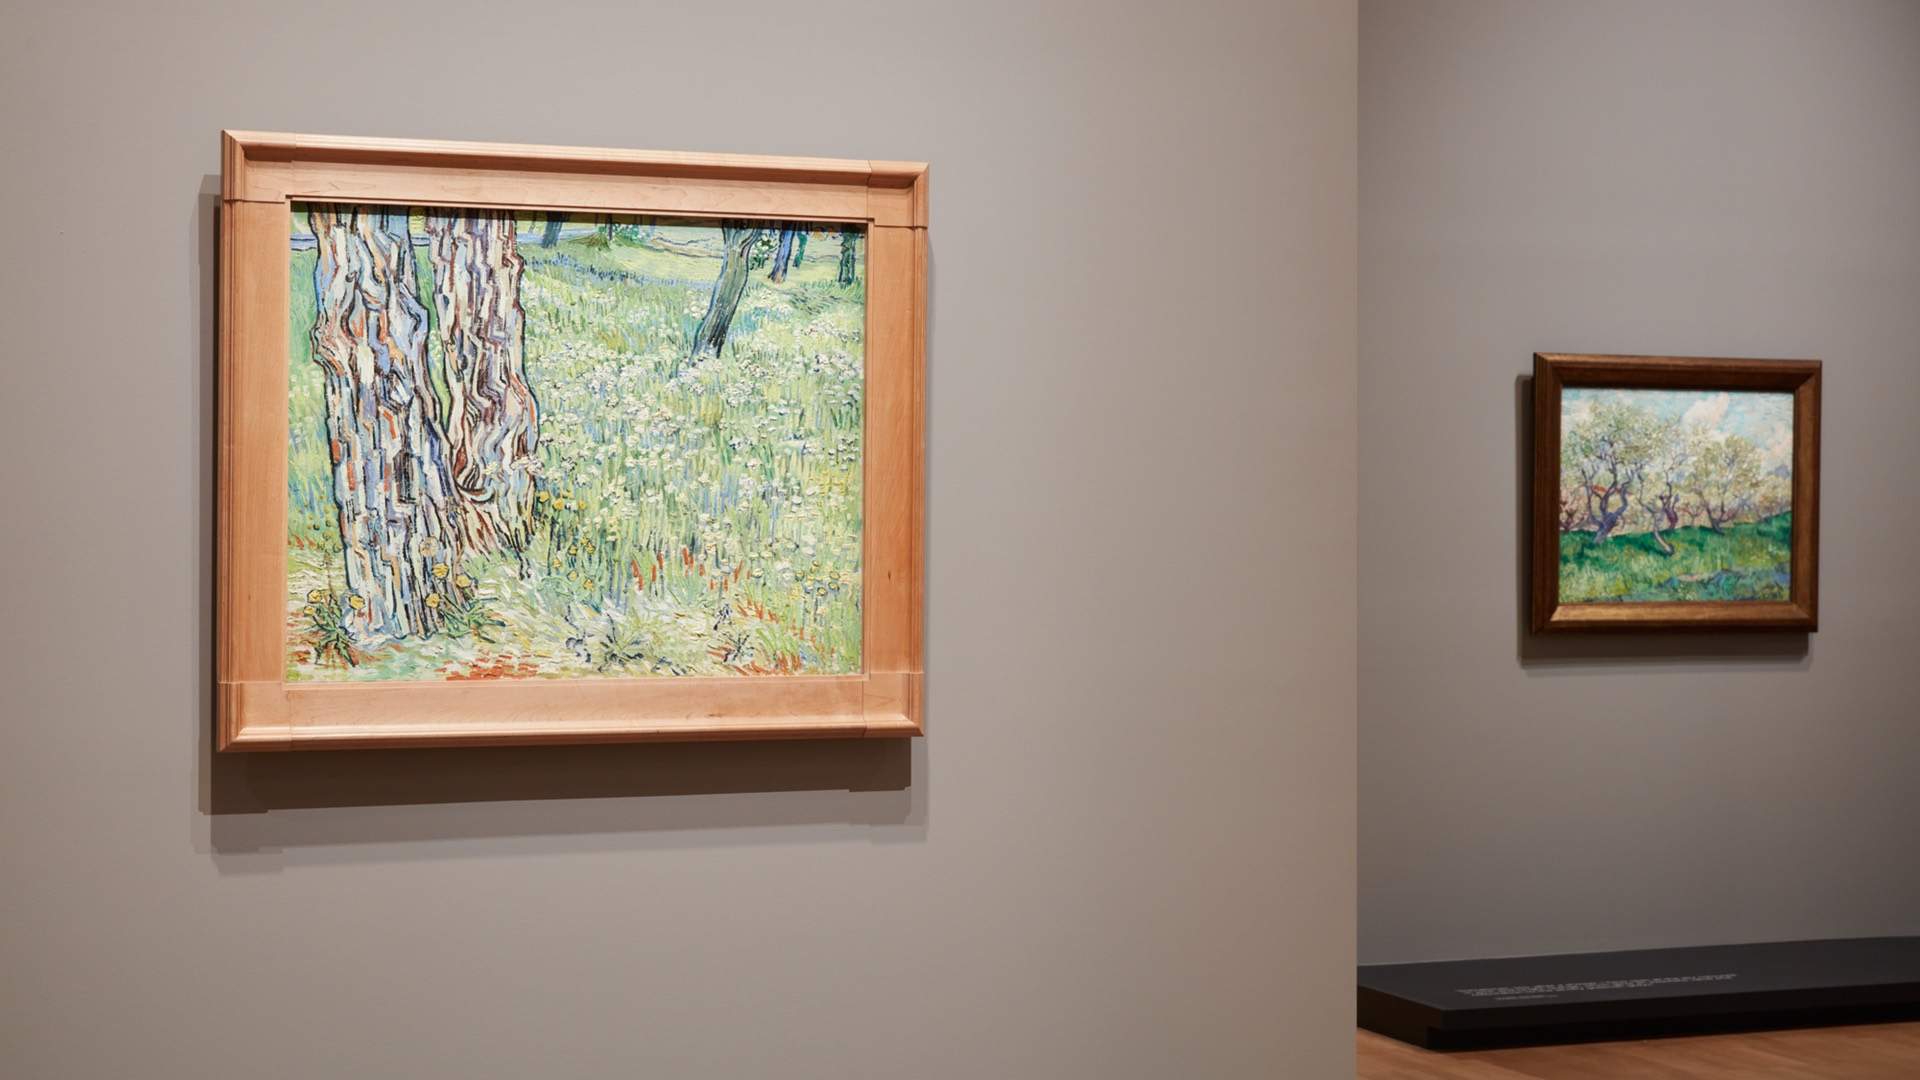 A Look Inside the NGV's Blockbuster Van Gogh Exhibition